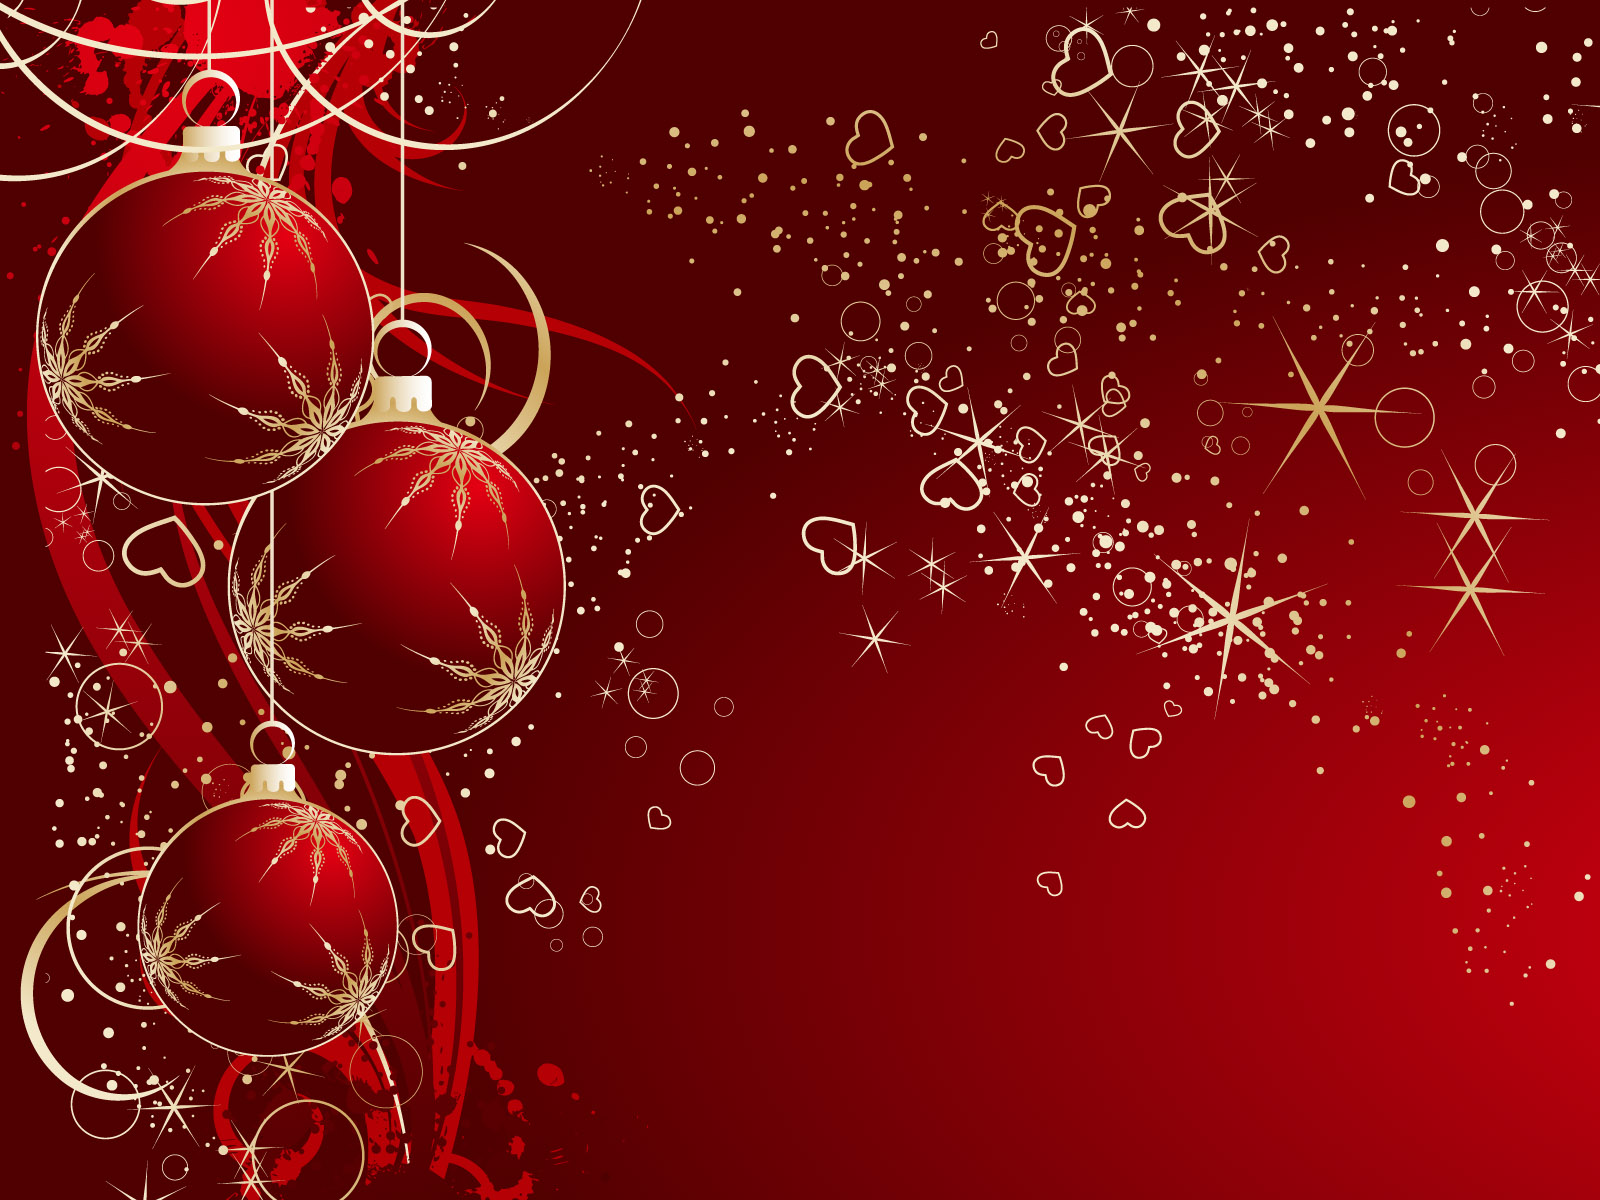 2015 Christmas backgrounds hd   wallpapers images photos